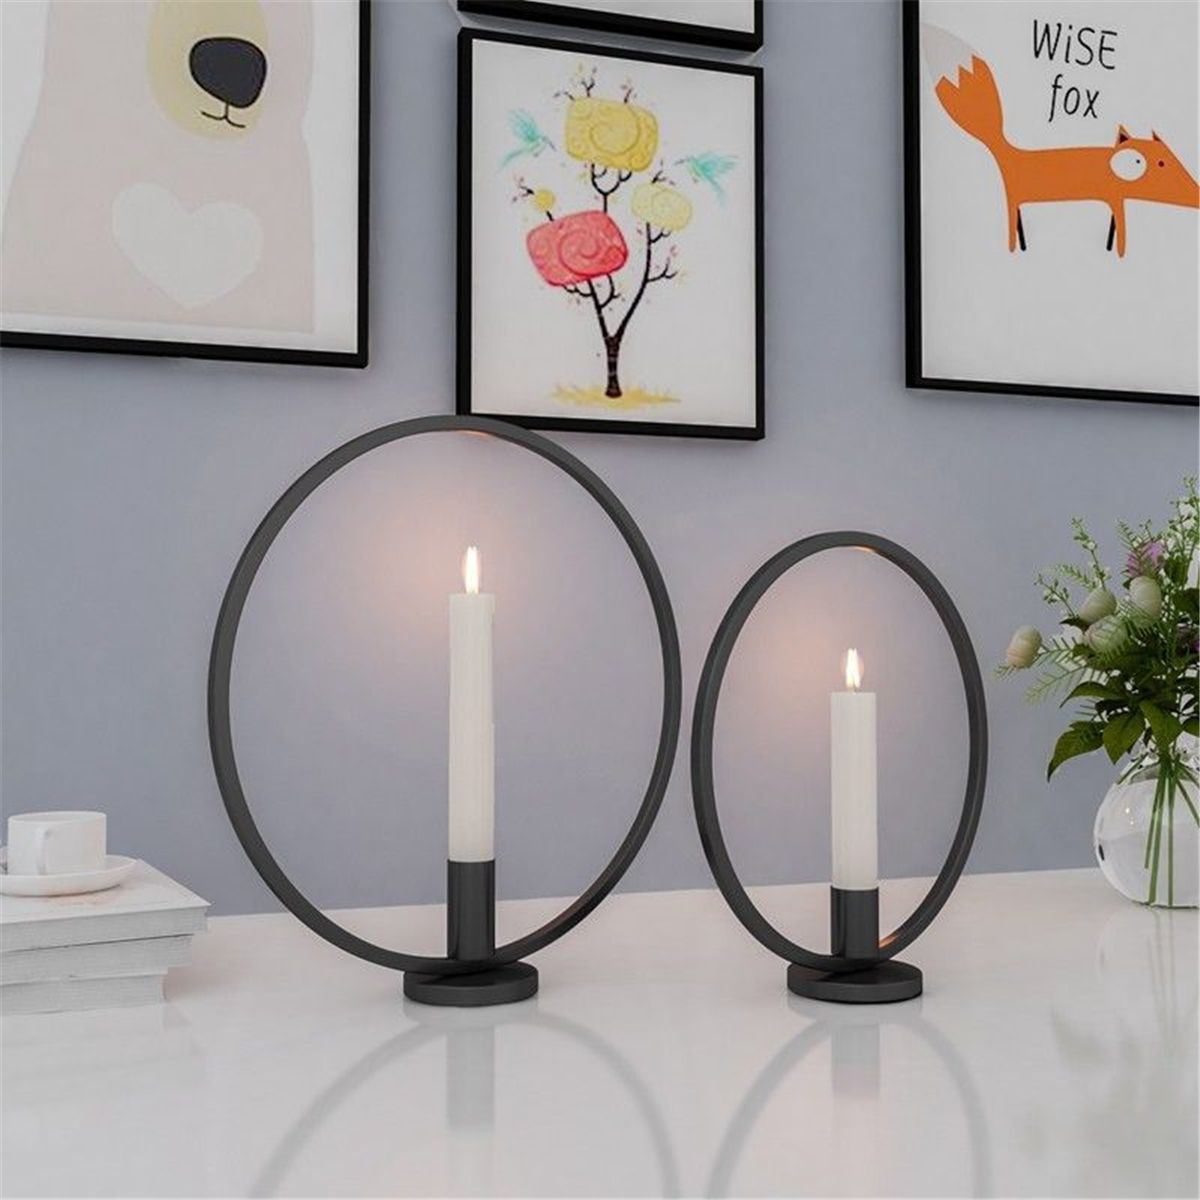 3D-Geometric-Nordic-Style-Wall-Candle-Holder-Metal-Candlestick-Home-Decor-1419815